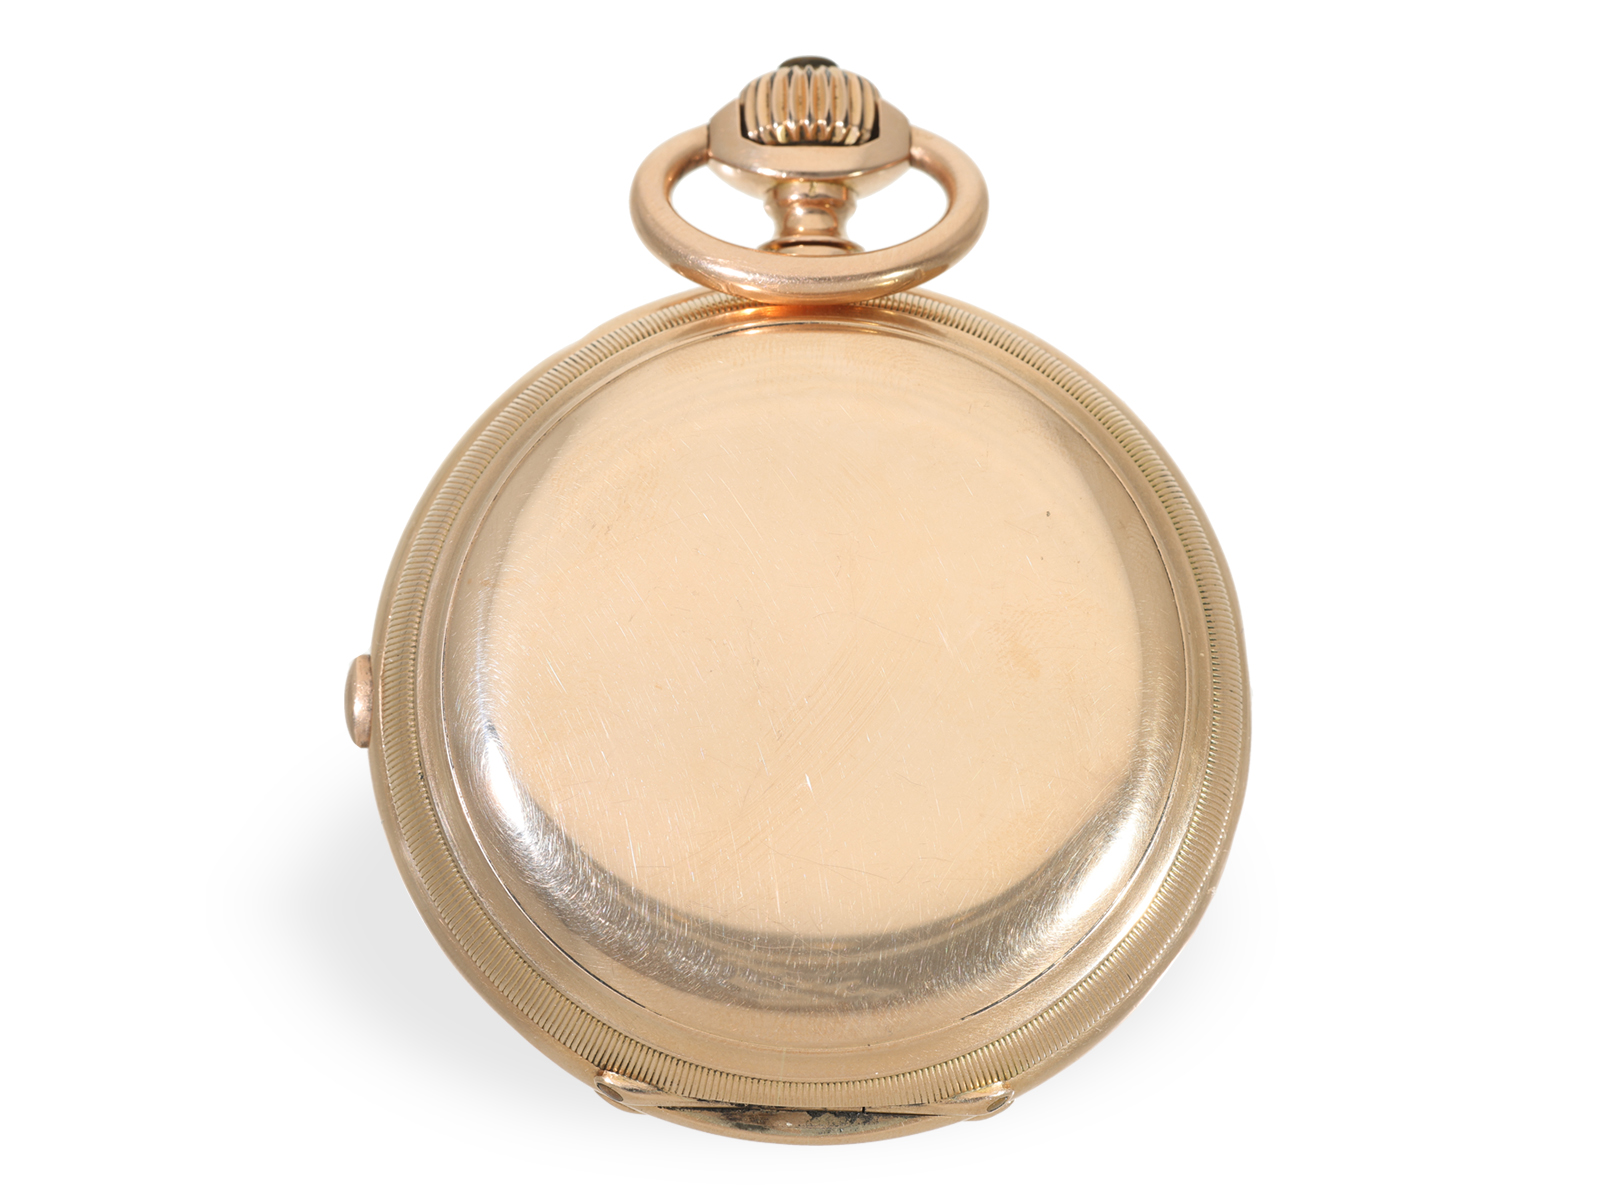 Pocket watch: especially heavy Ankerchronometer with chronograph, ca. 1890 - Image 8 of 8